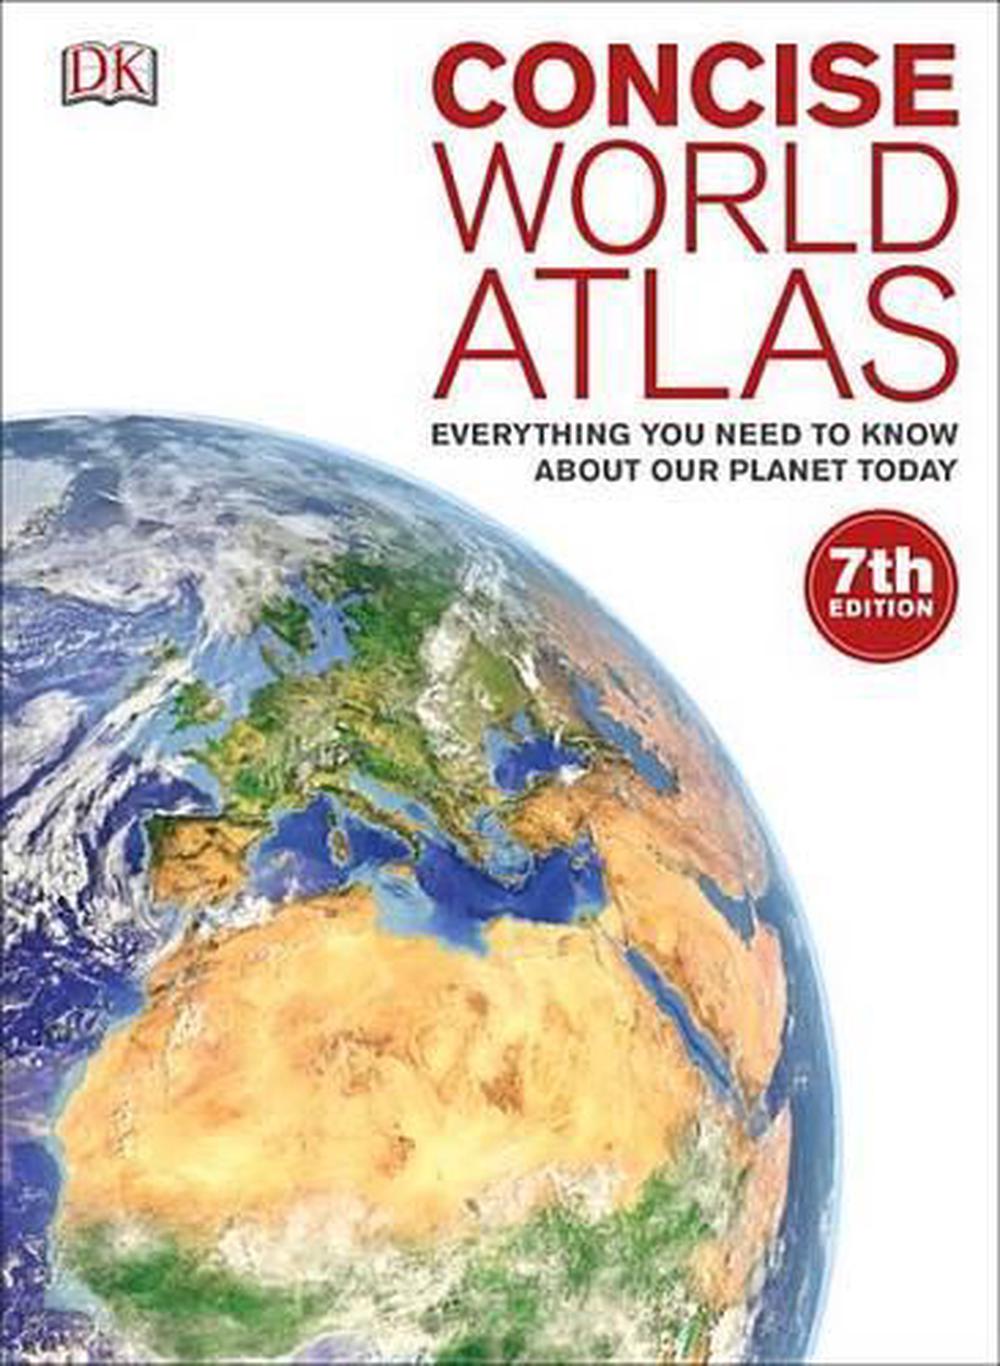 Concise World Atlas By Dk English Hardcover Book Free Shipping Ebay